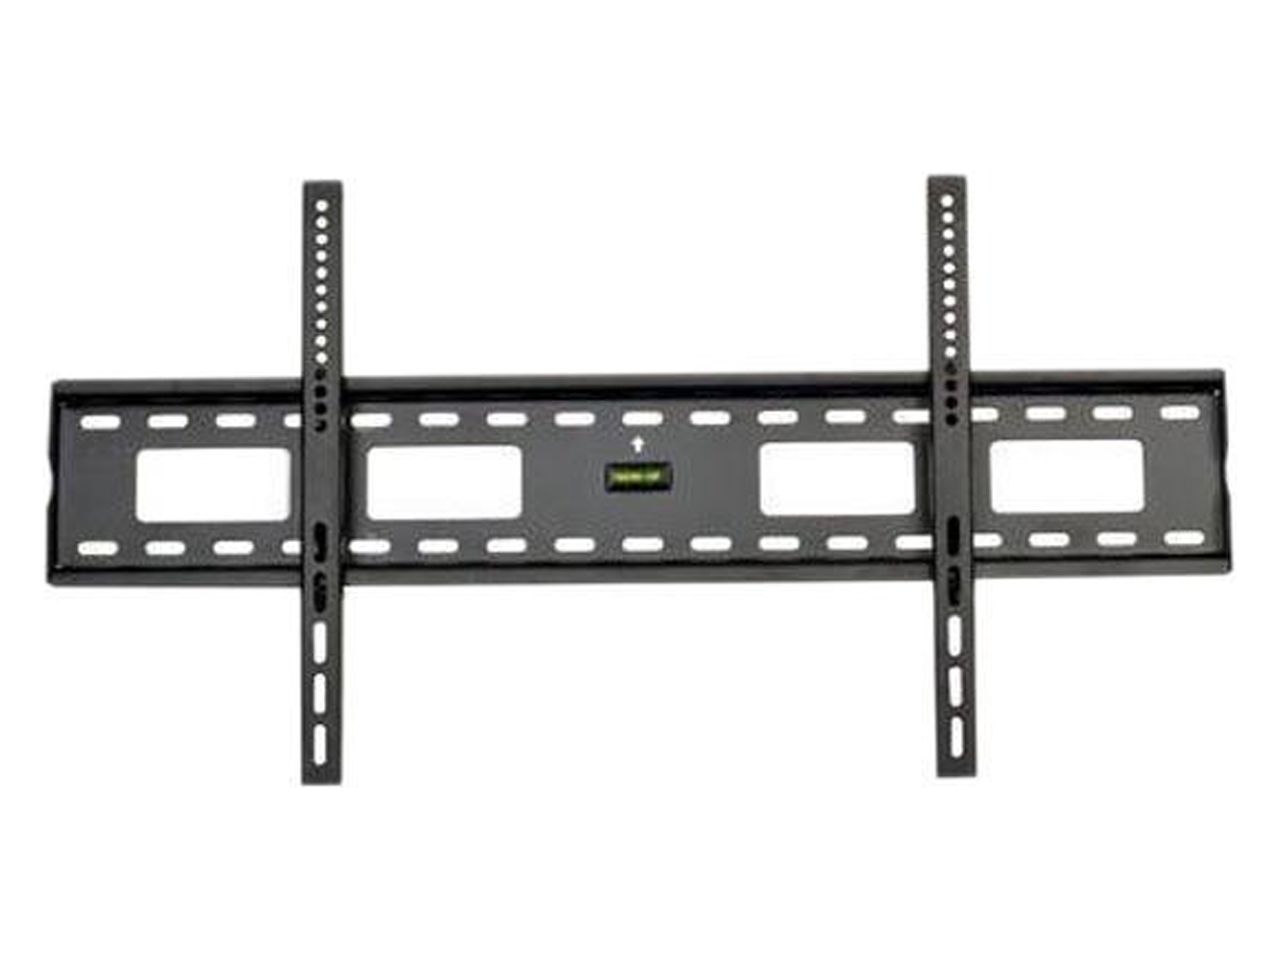 Tripp Lite DWF4585X 45"-85" Fixed TV wall mount LED & LCD HDTV up to VESA 800x400max load 200 lbs Compatible with Samsung, Vizio, Sony, Panasonic, LG and Toshiba TV - image 2 of 3